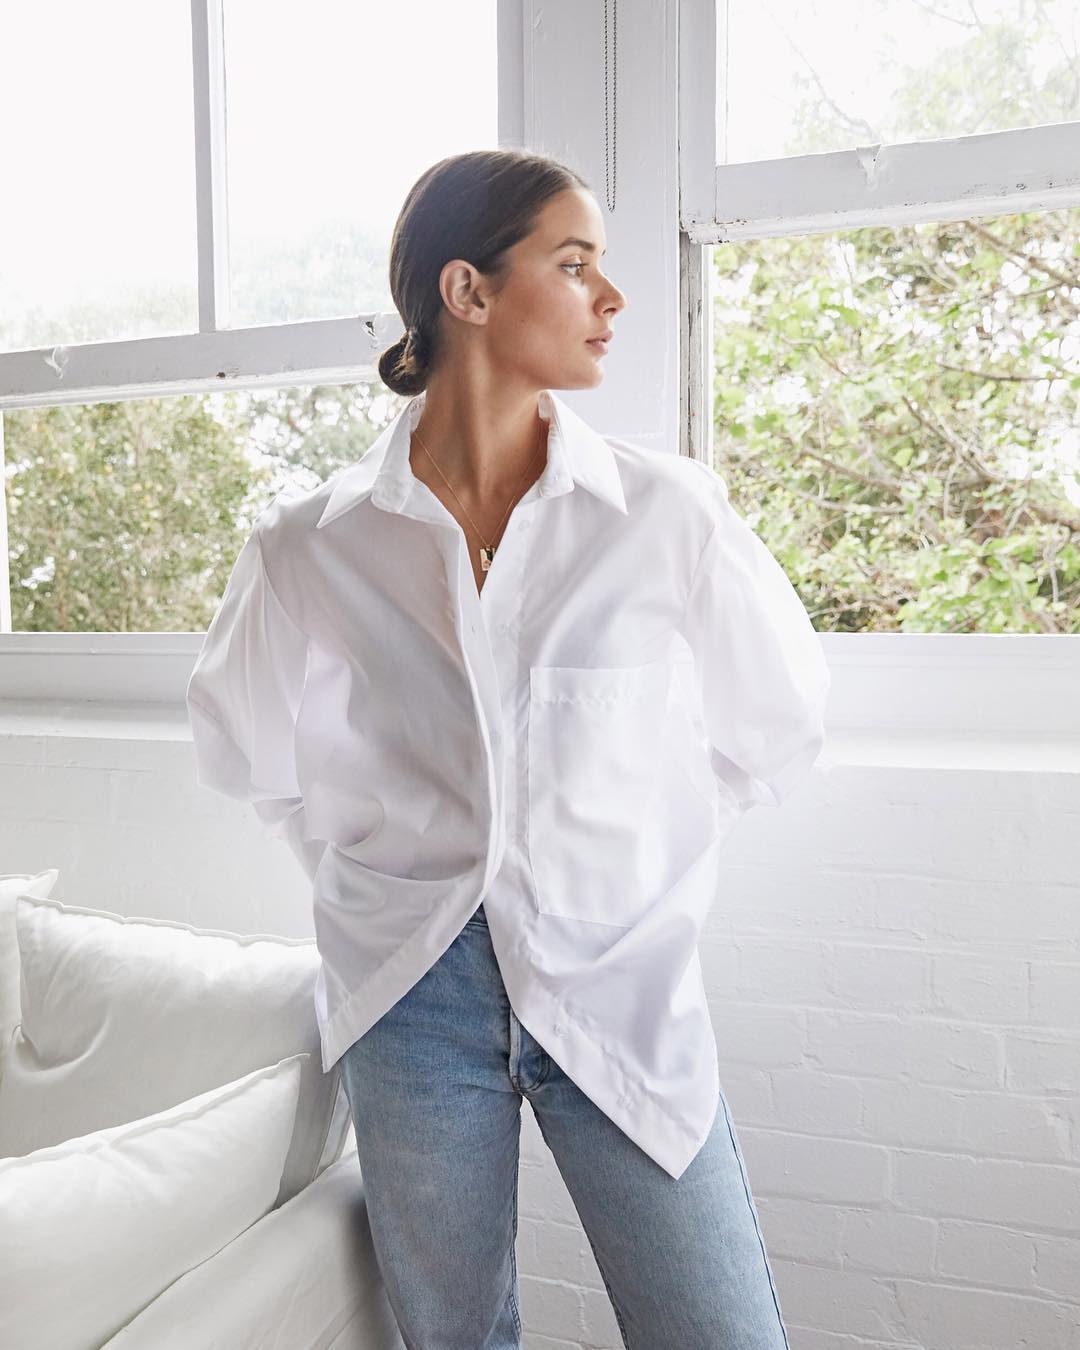 15 Crisp White Button-Down Shirts You Can Wear Year-Round — Sara Crampton Harper & Harley with a low bun, white top, and jeans